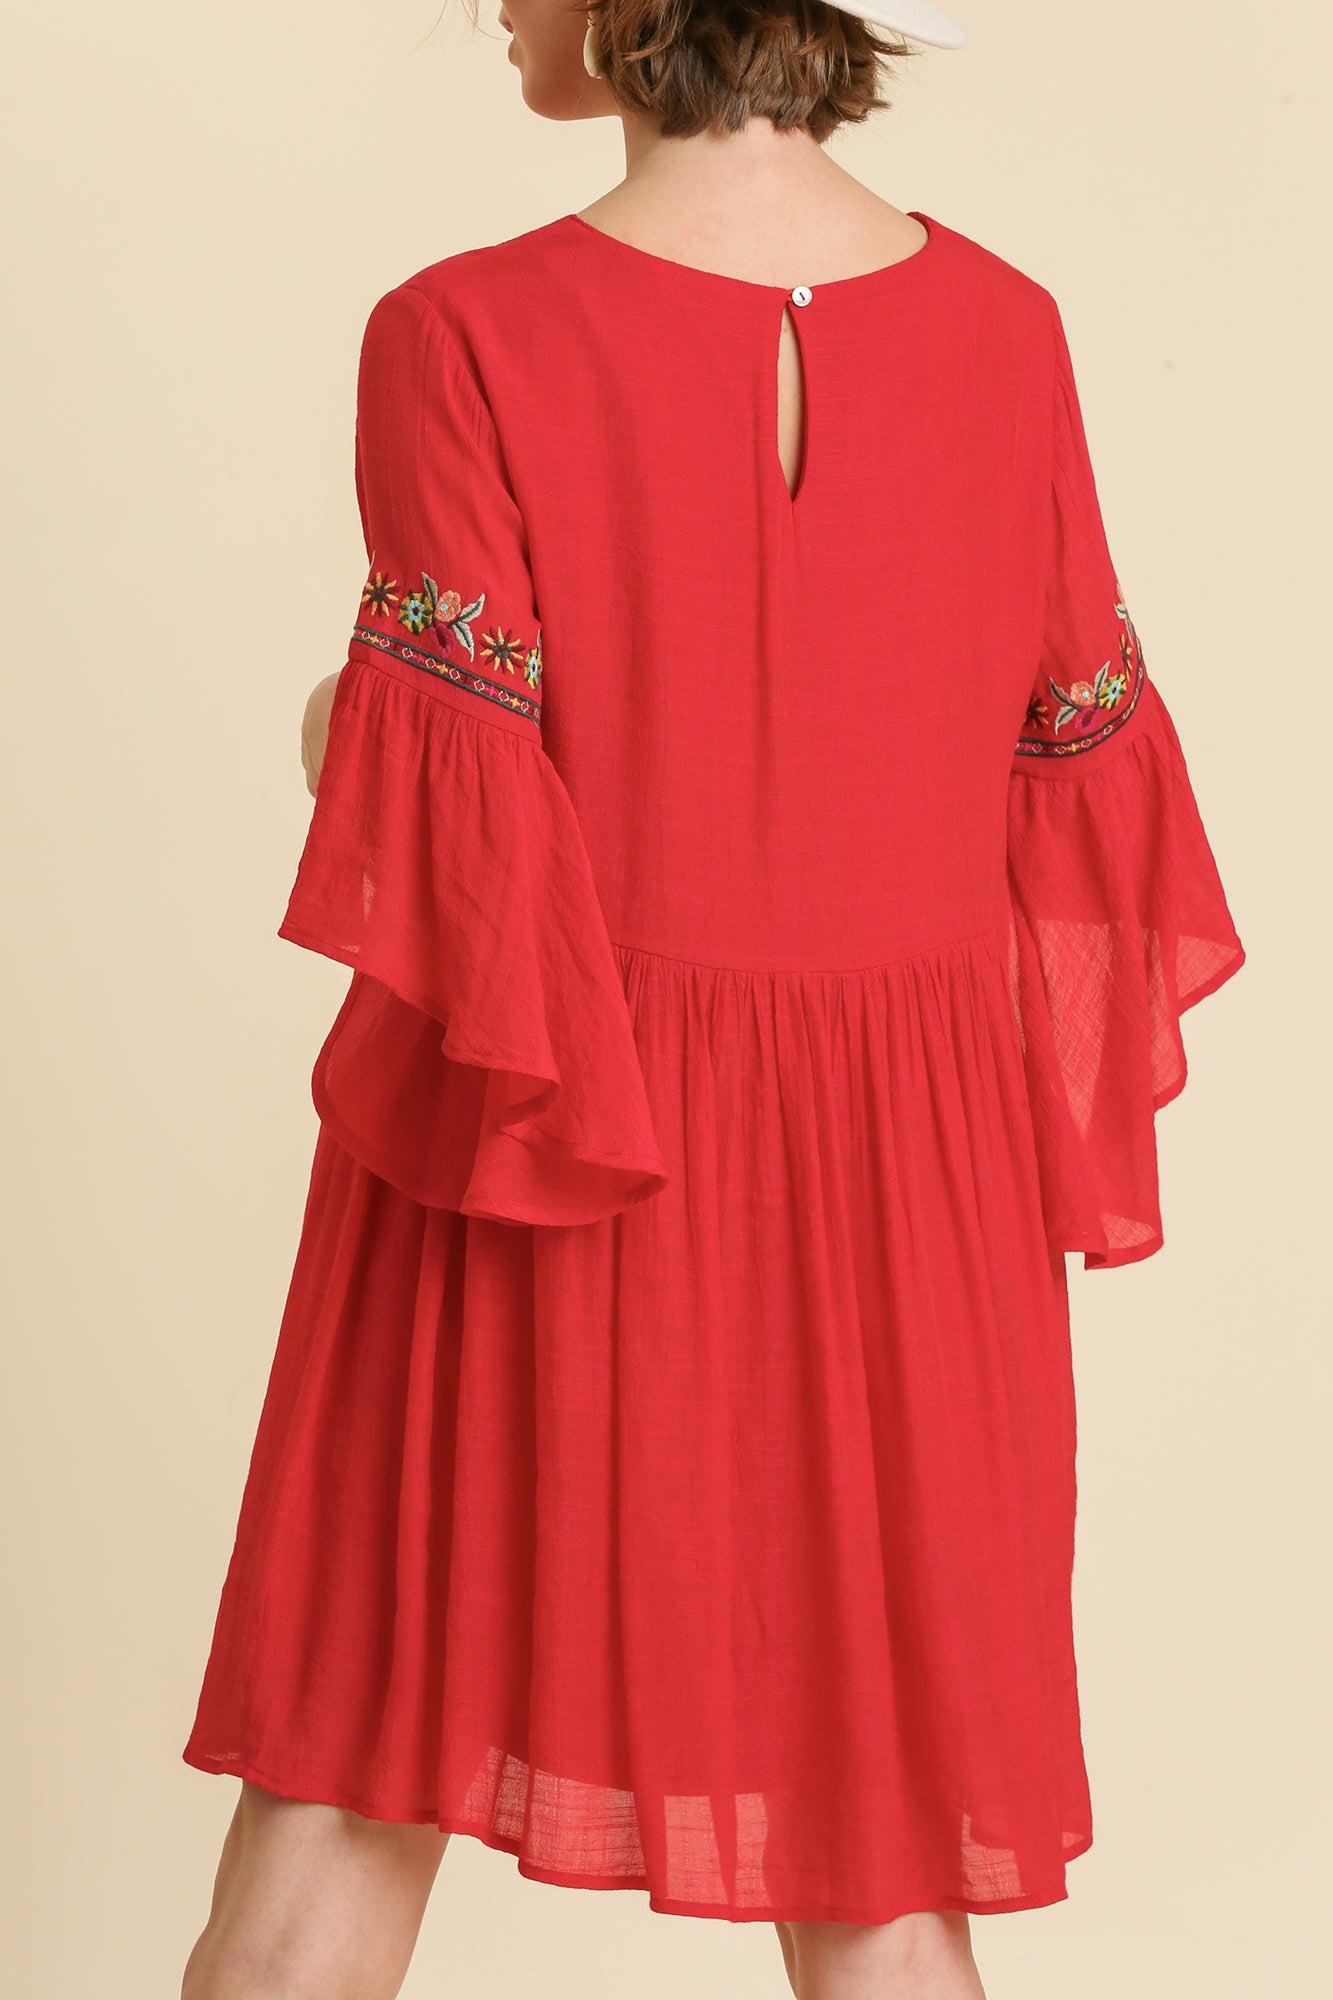 Candy Apple Floral Embroidered Bell Sleeve Dress